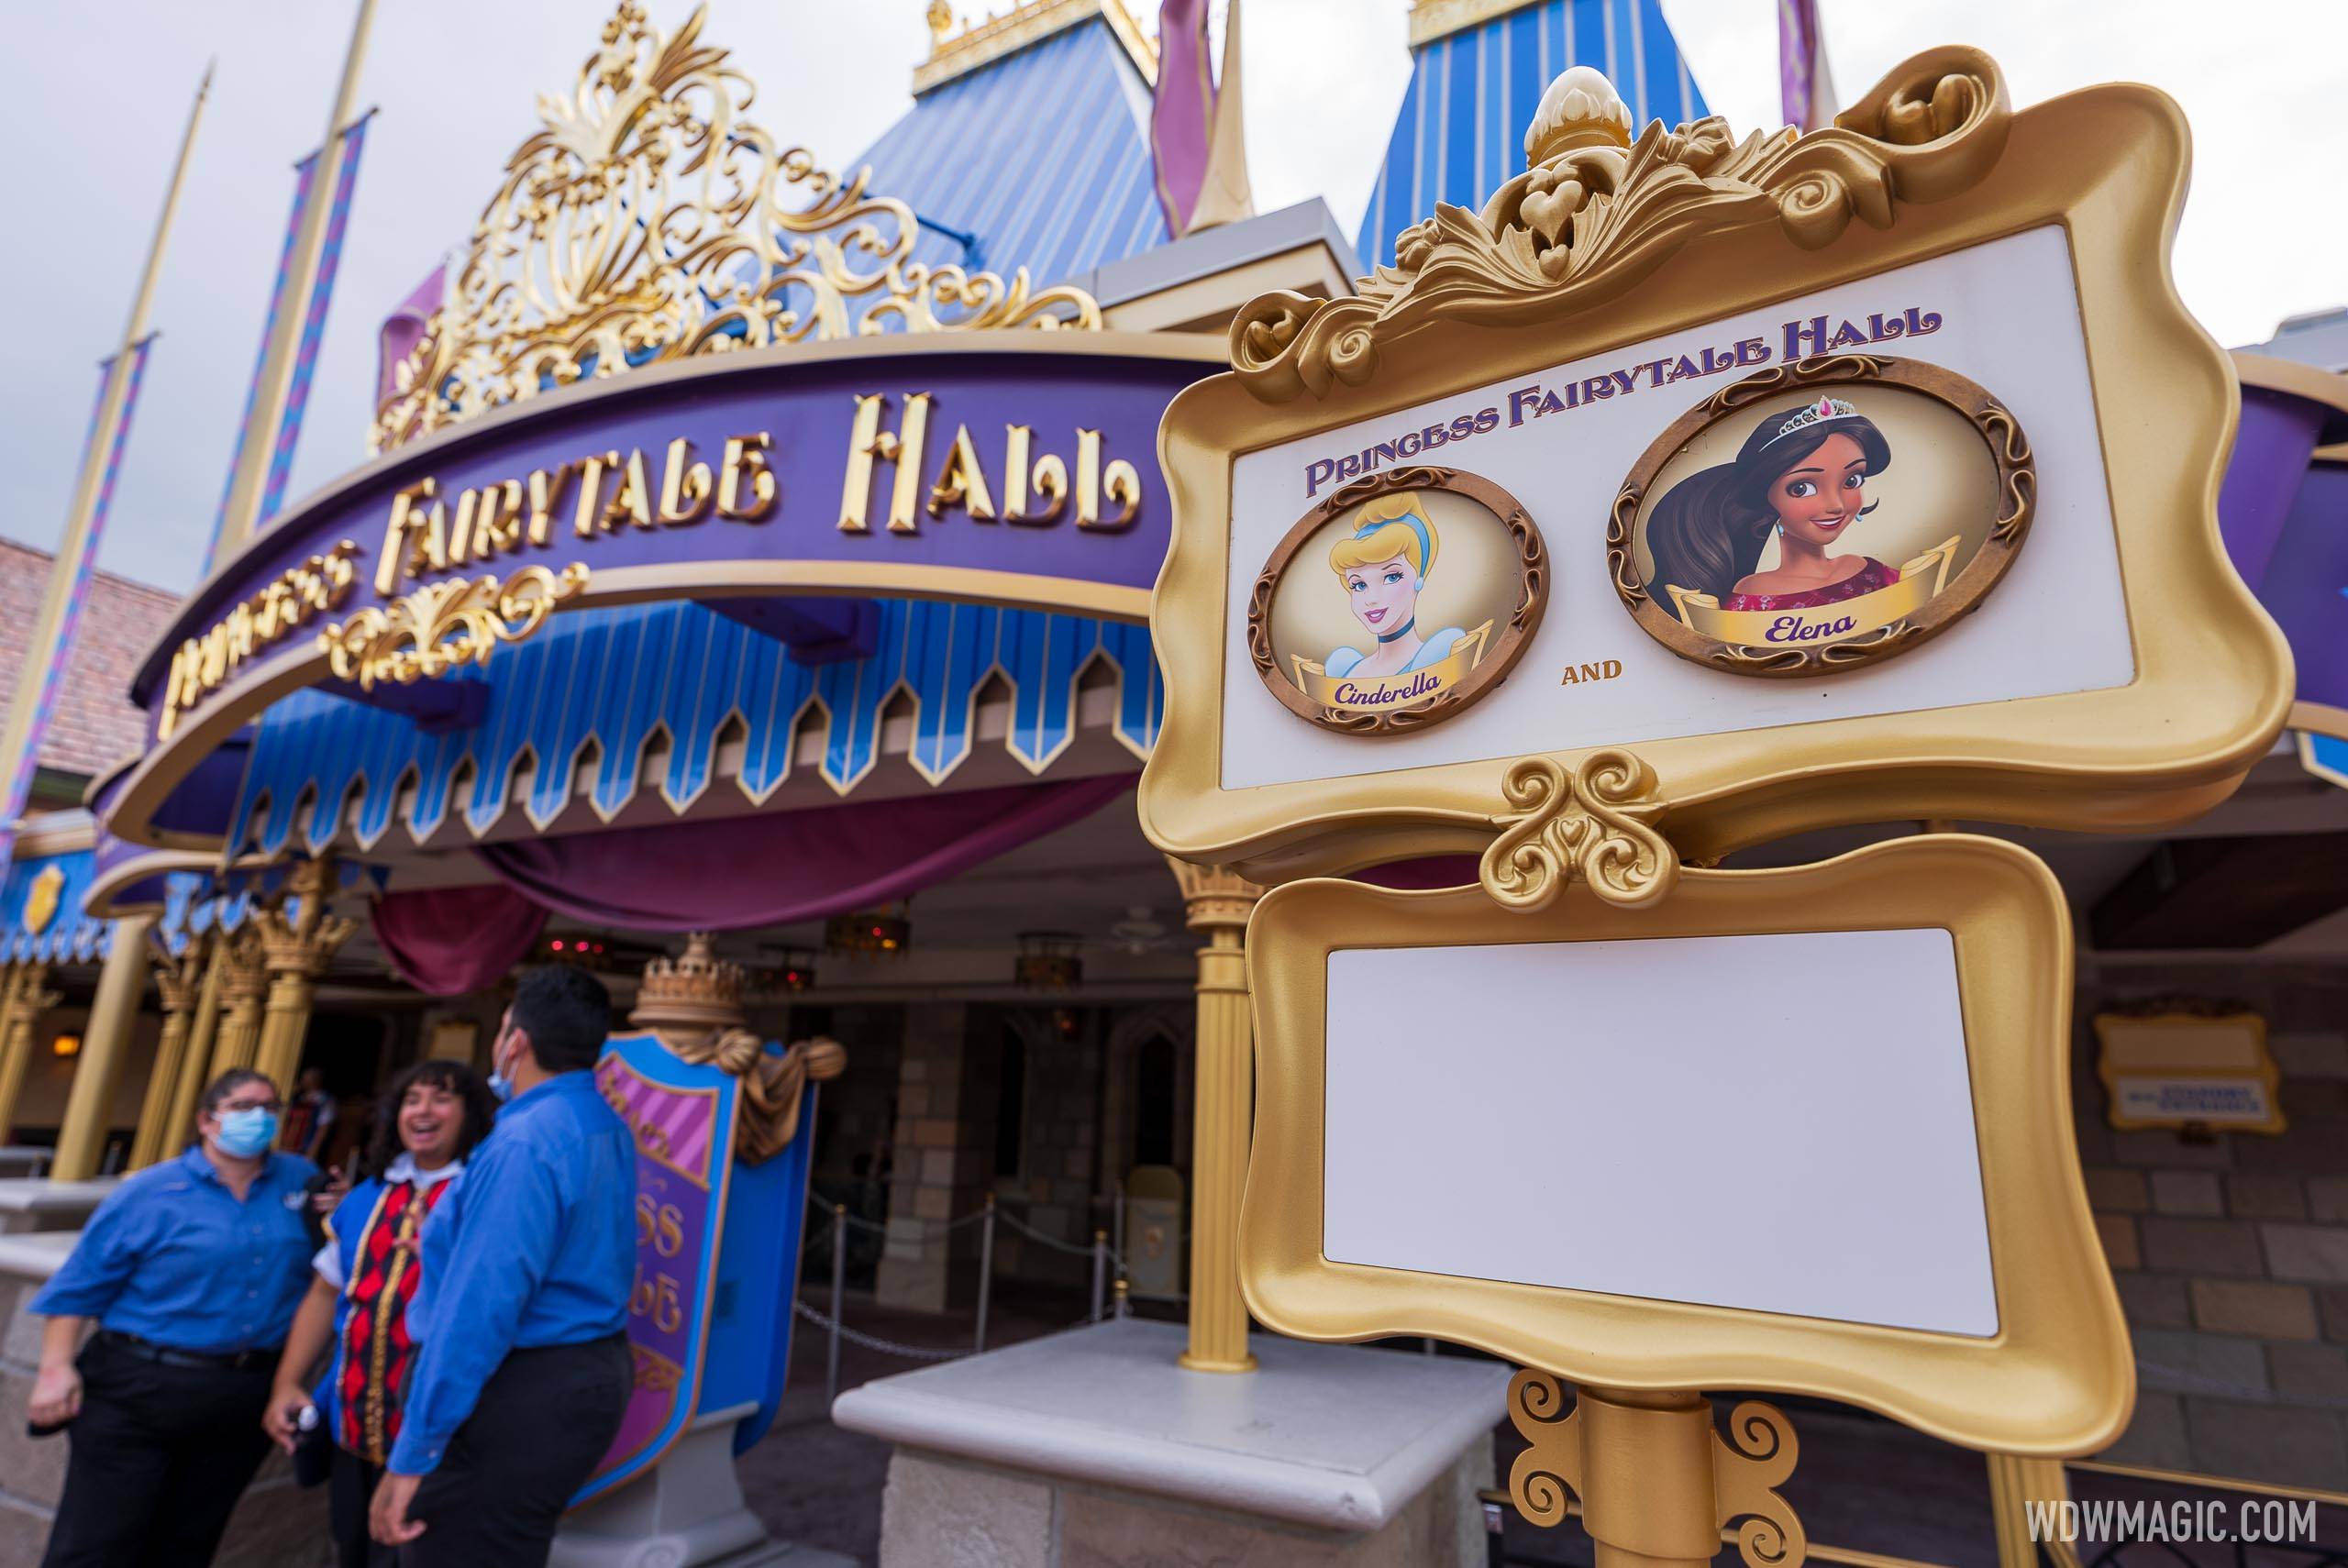 Princess Fairytale Hall reopening